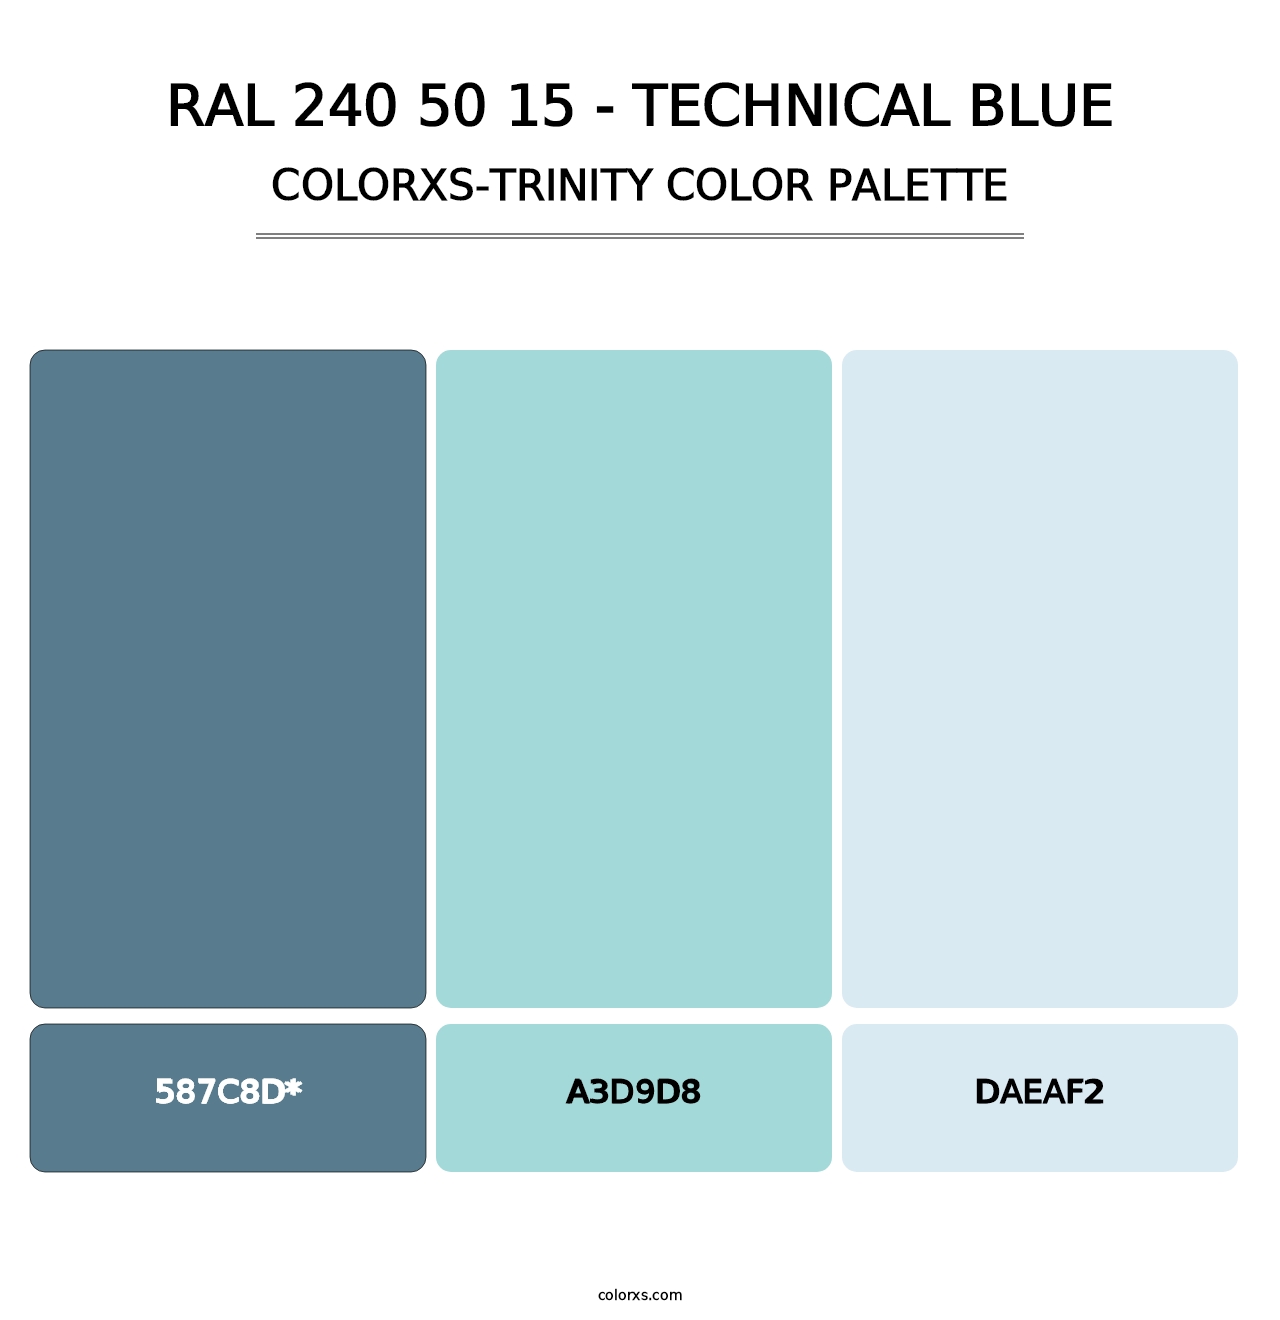 RAL 240 50 15 - Technical Blue - Colorxs Trinity Palette